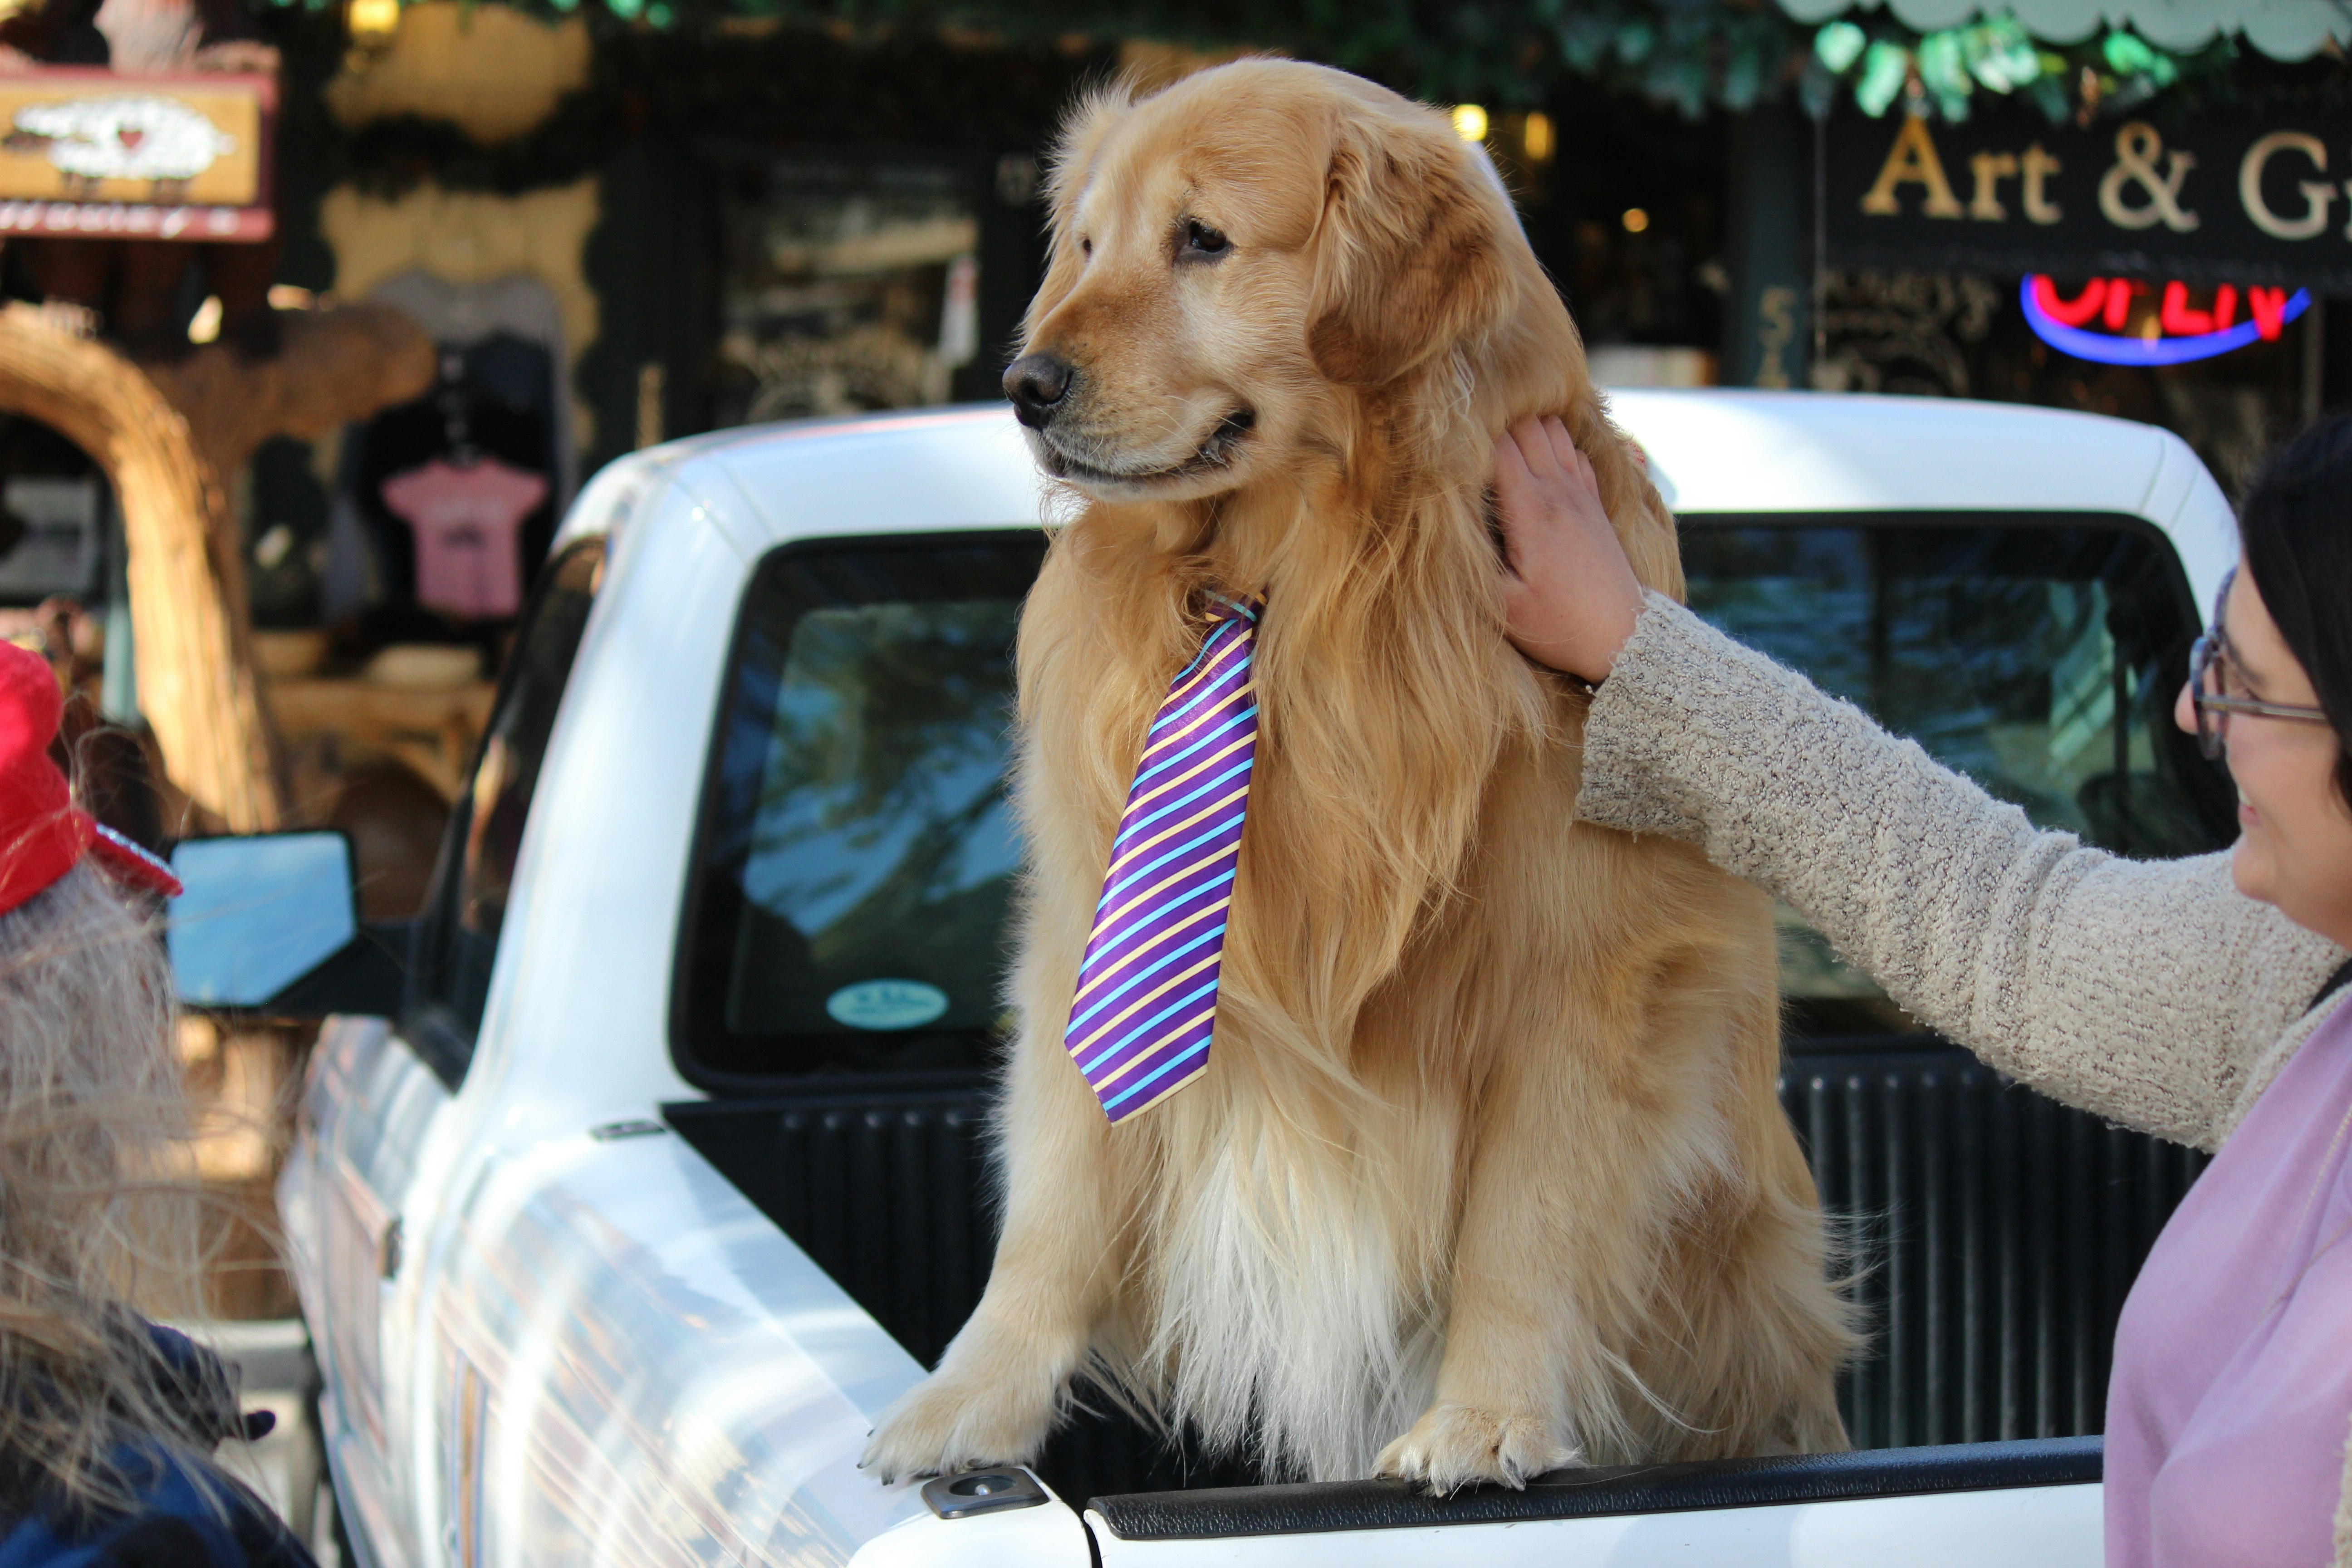 A golden retreiver with a tie around his neck poses for a photo